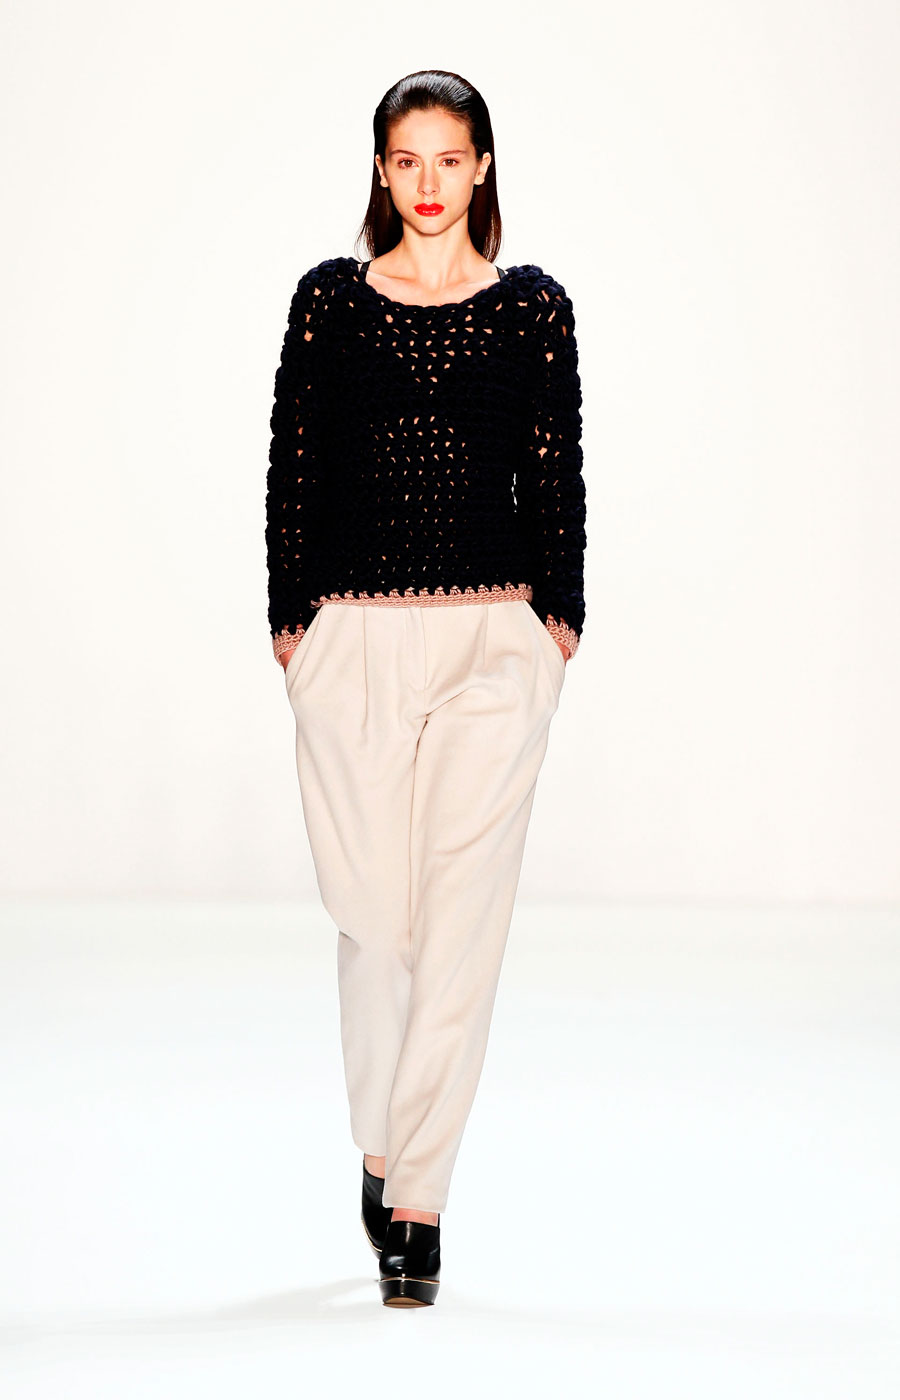 AW 2013 by Hien Le (6)